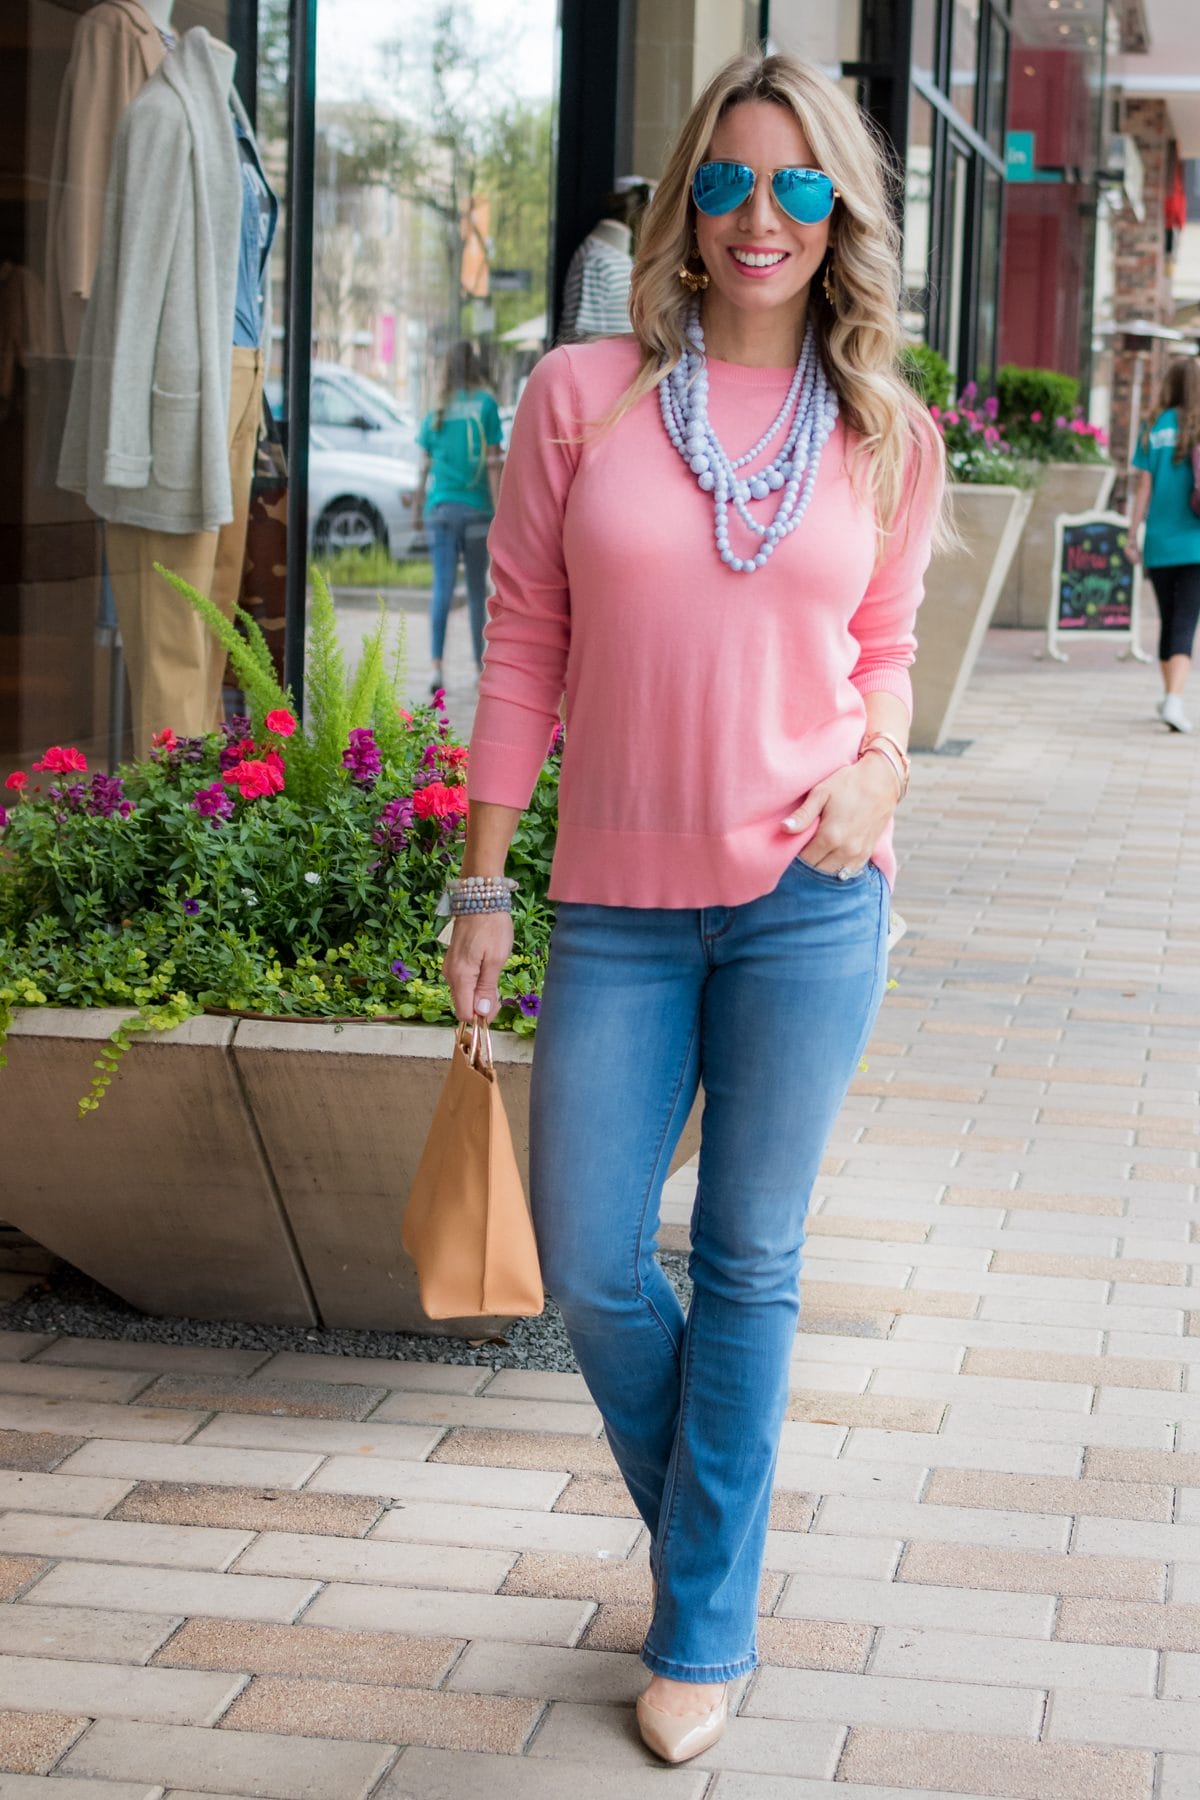 TIE-DYE AND JEGGINGS - 50 IS NOT OLD - A Fashion And Beauty Blog For Women  Over 50